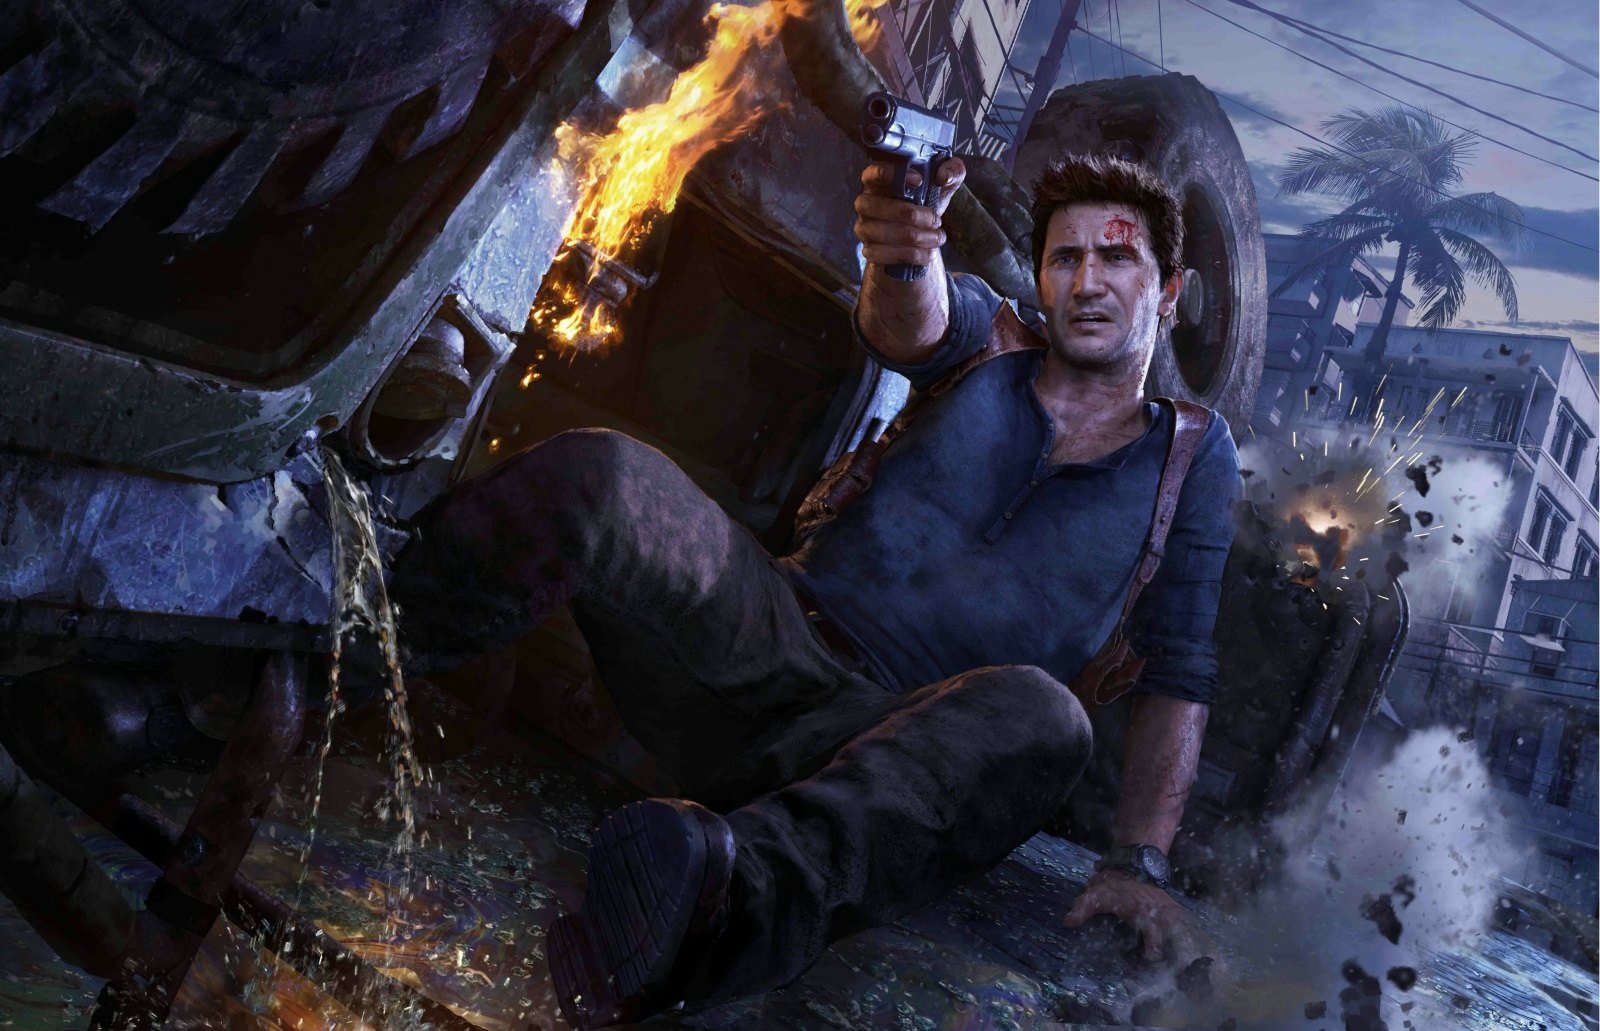 new uncharted ps5